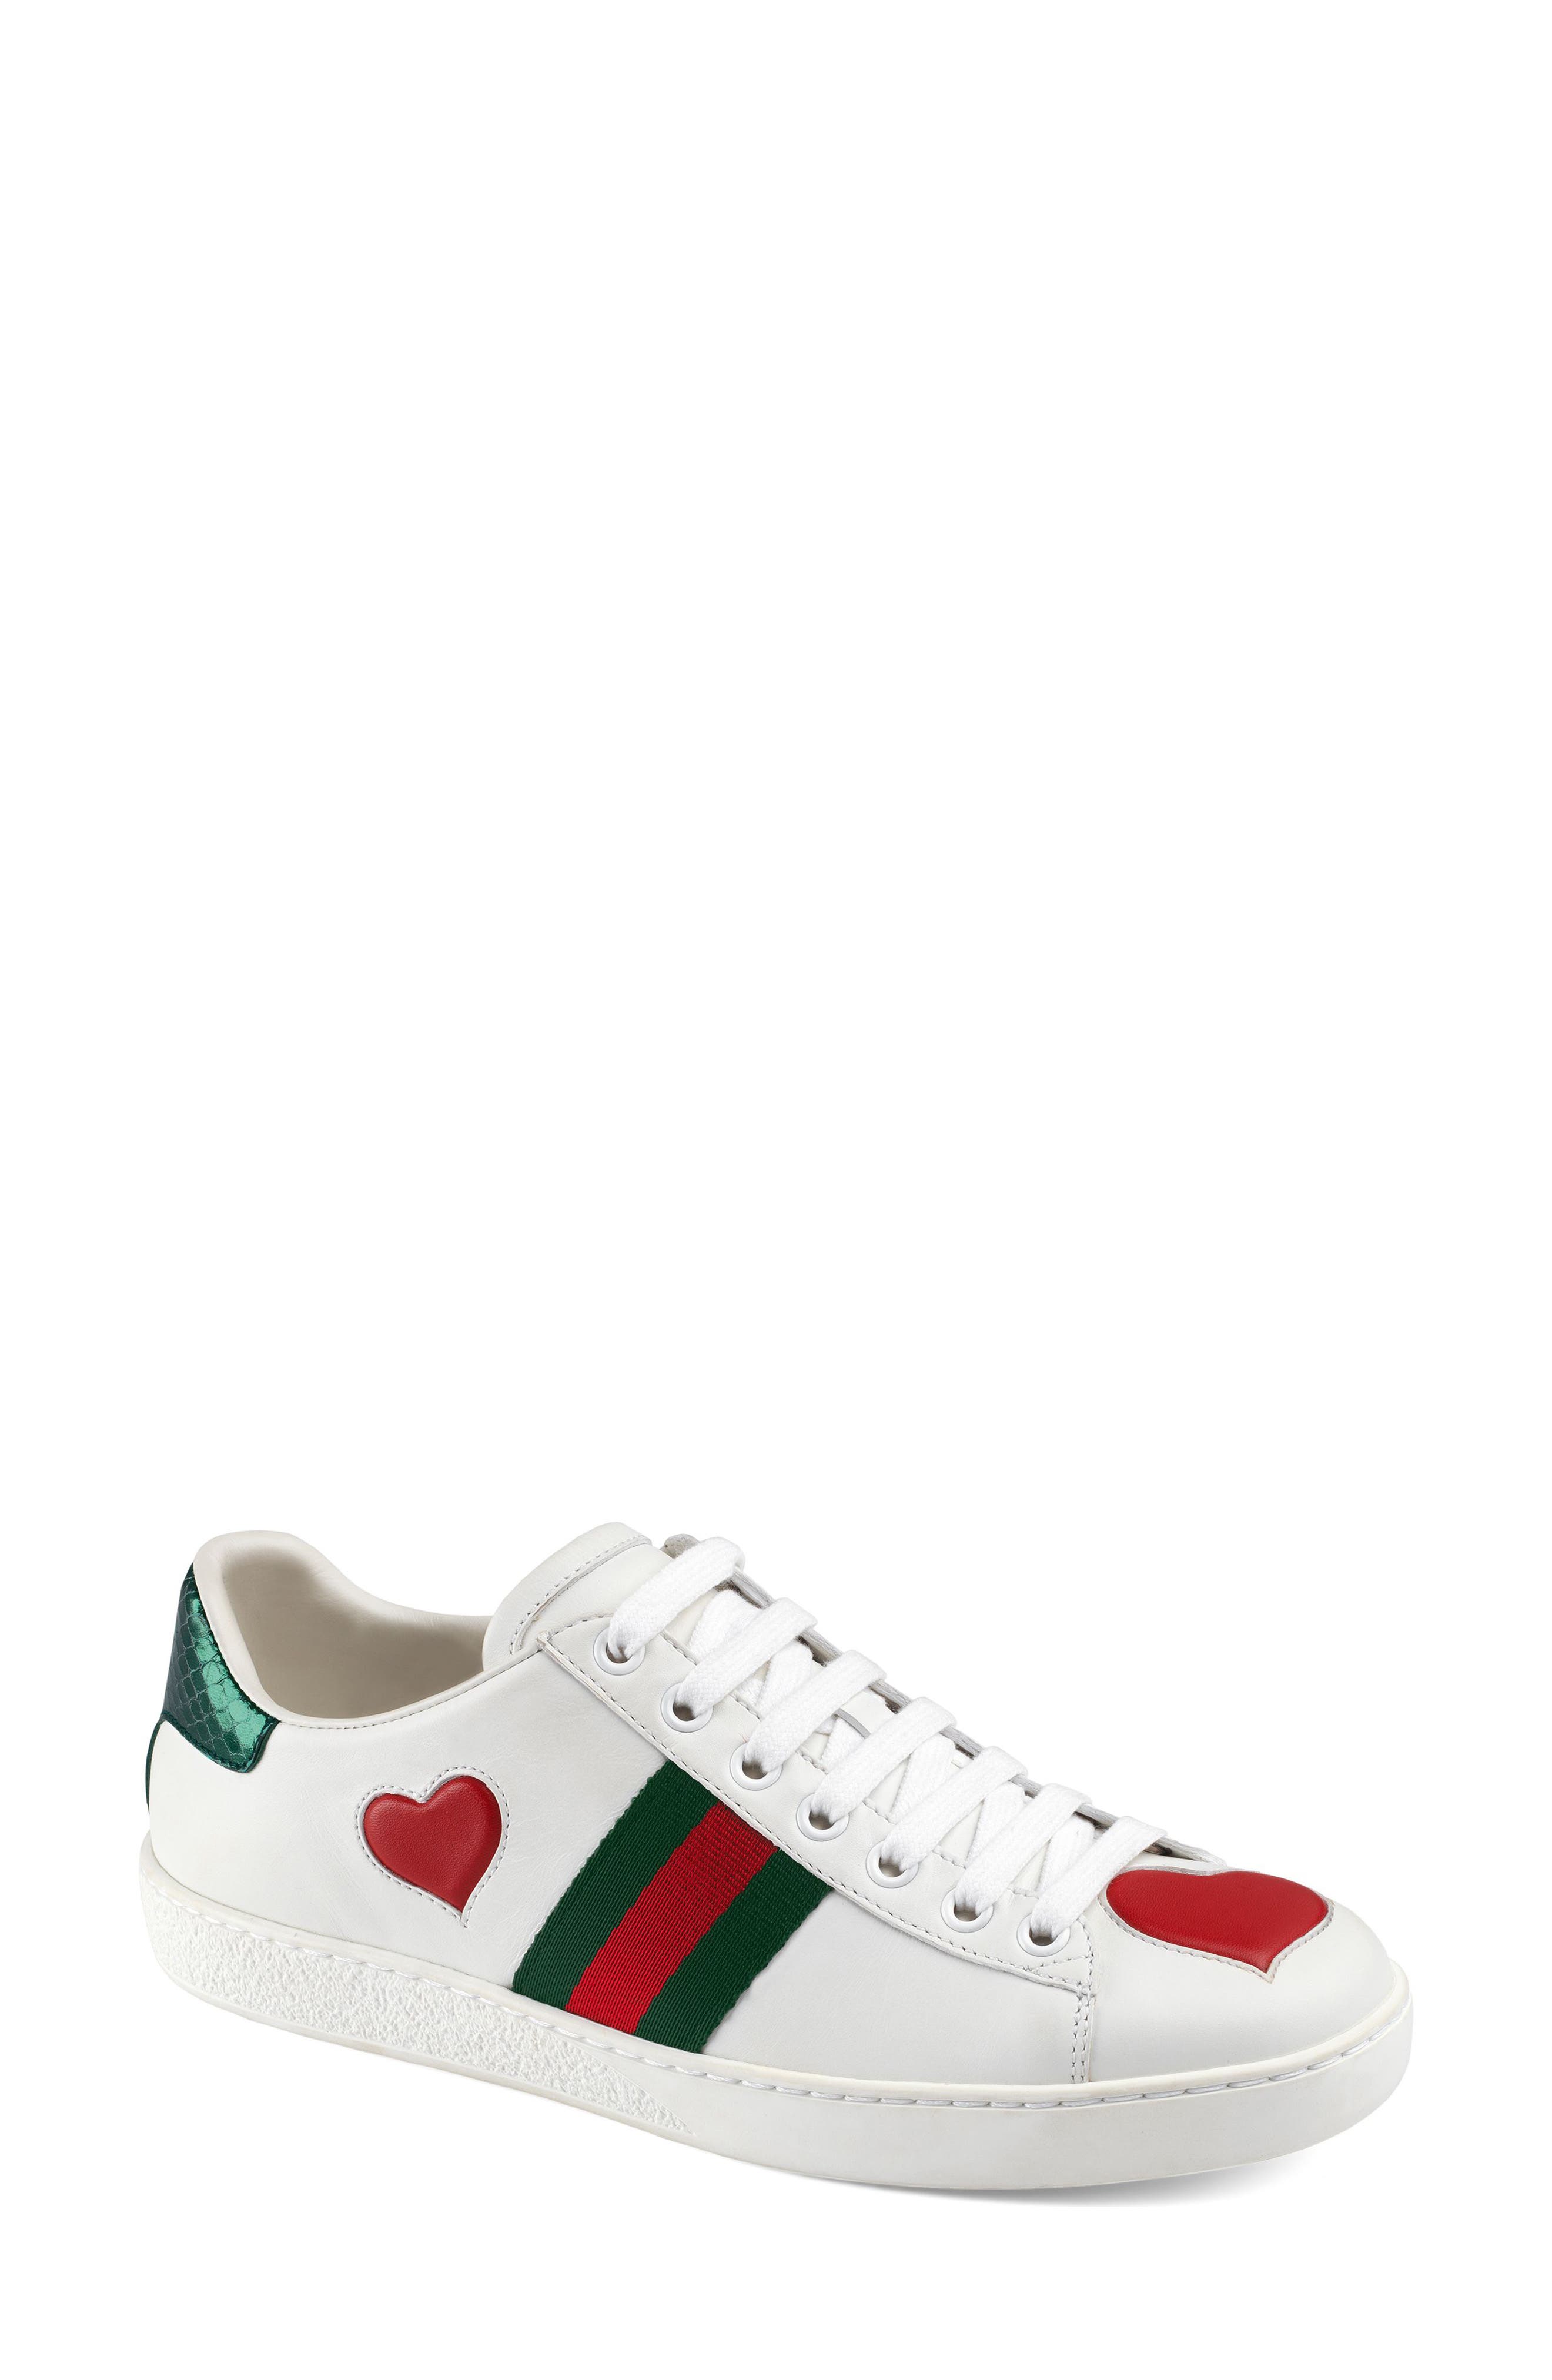 gucci love heart sneakers